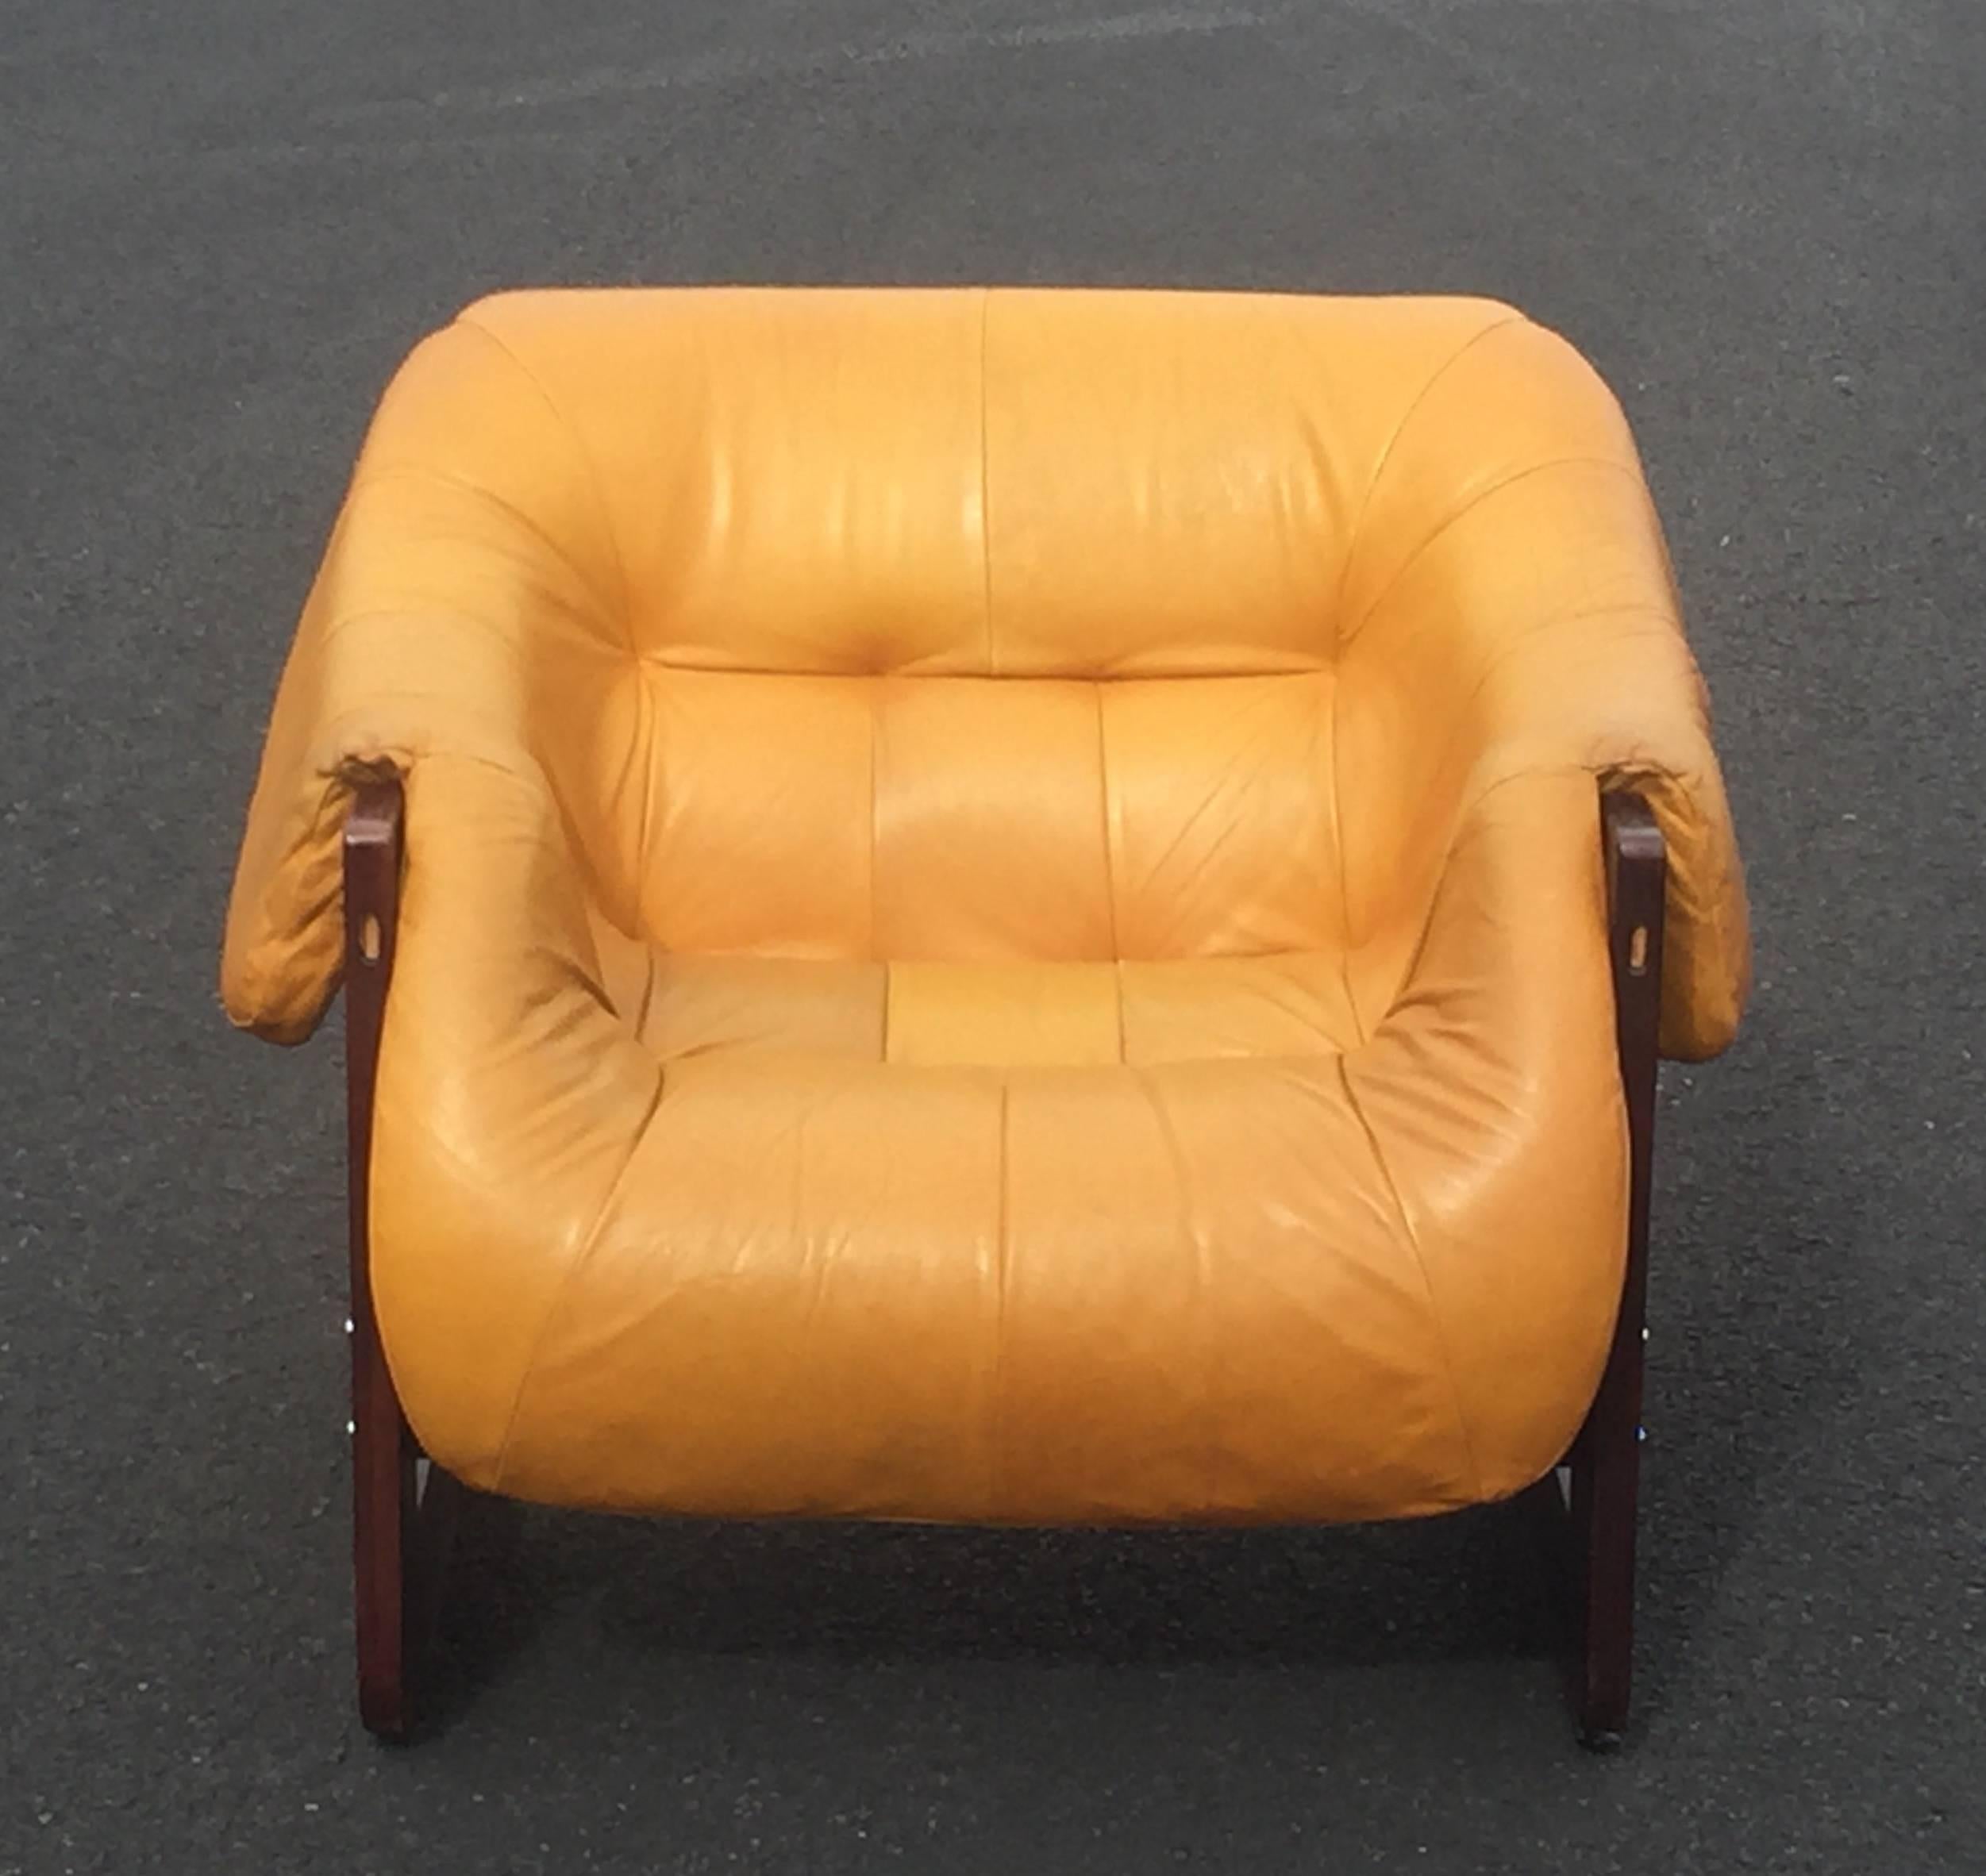 Puffed up iconic leather lounge chair in rosewood and leather by Percival Lafer.
The leather is a beautiful butterscotchy yellow color, with a bit of wear, but more patina than a problem. One small mark or line as shown in photo. No rips or